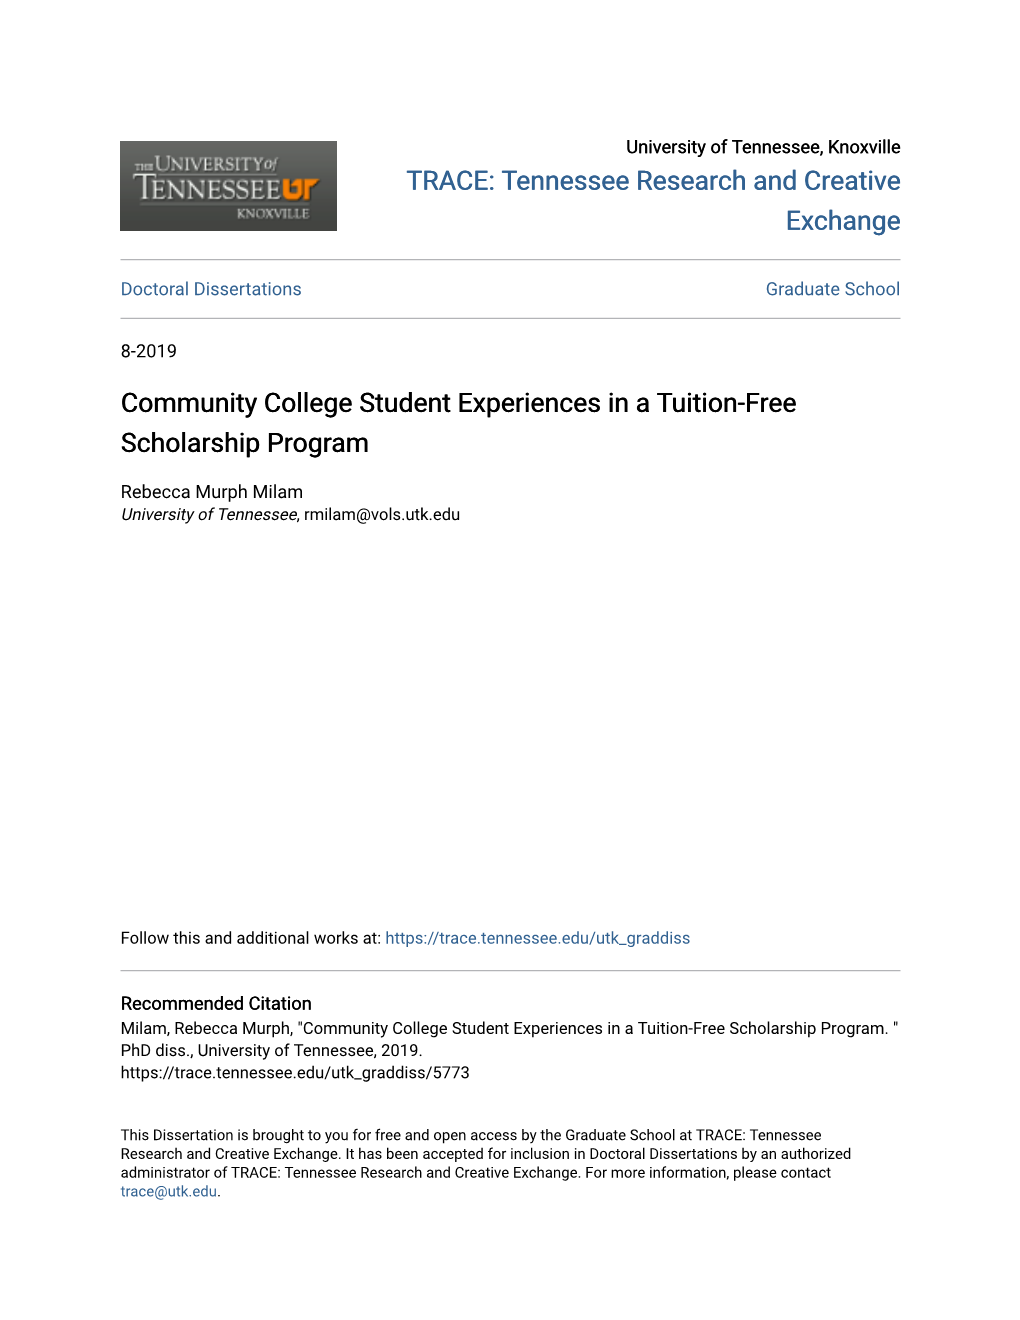 Community College Student Experiences in a Tuition-Free Scholarship Program